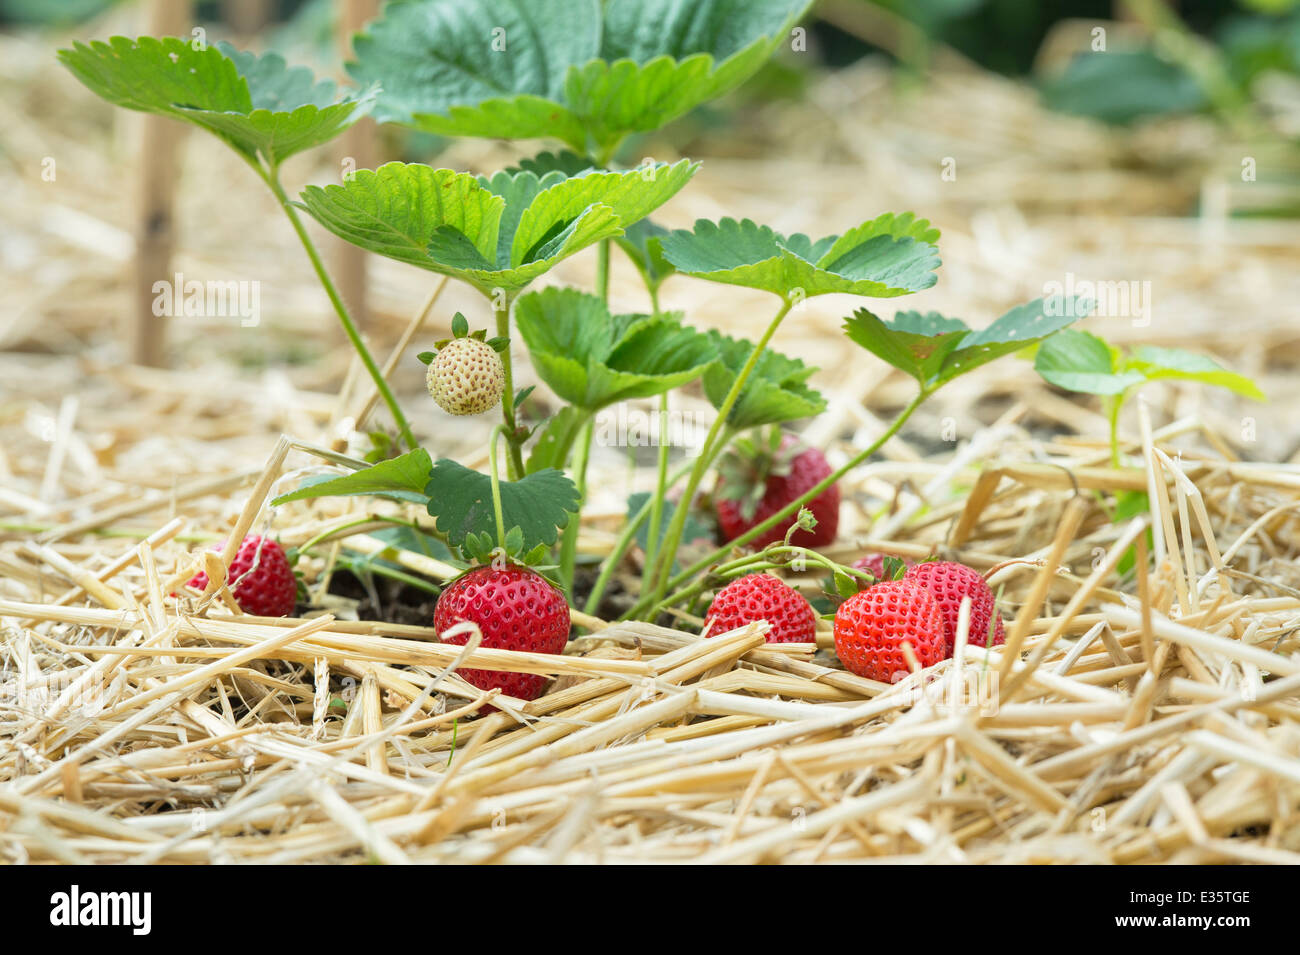 Fragaria Ananassa. Strawberry ‘buddy’ fruits ripening on the plant on a bed of straw in an English Garden Stock Photo